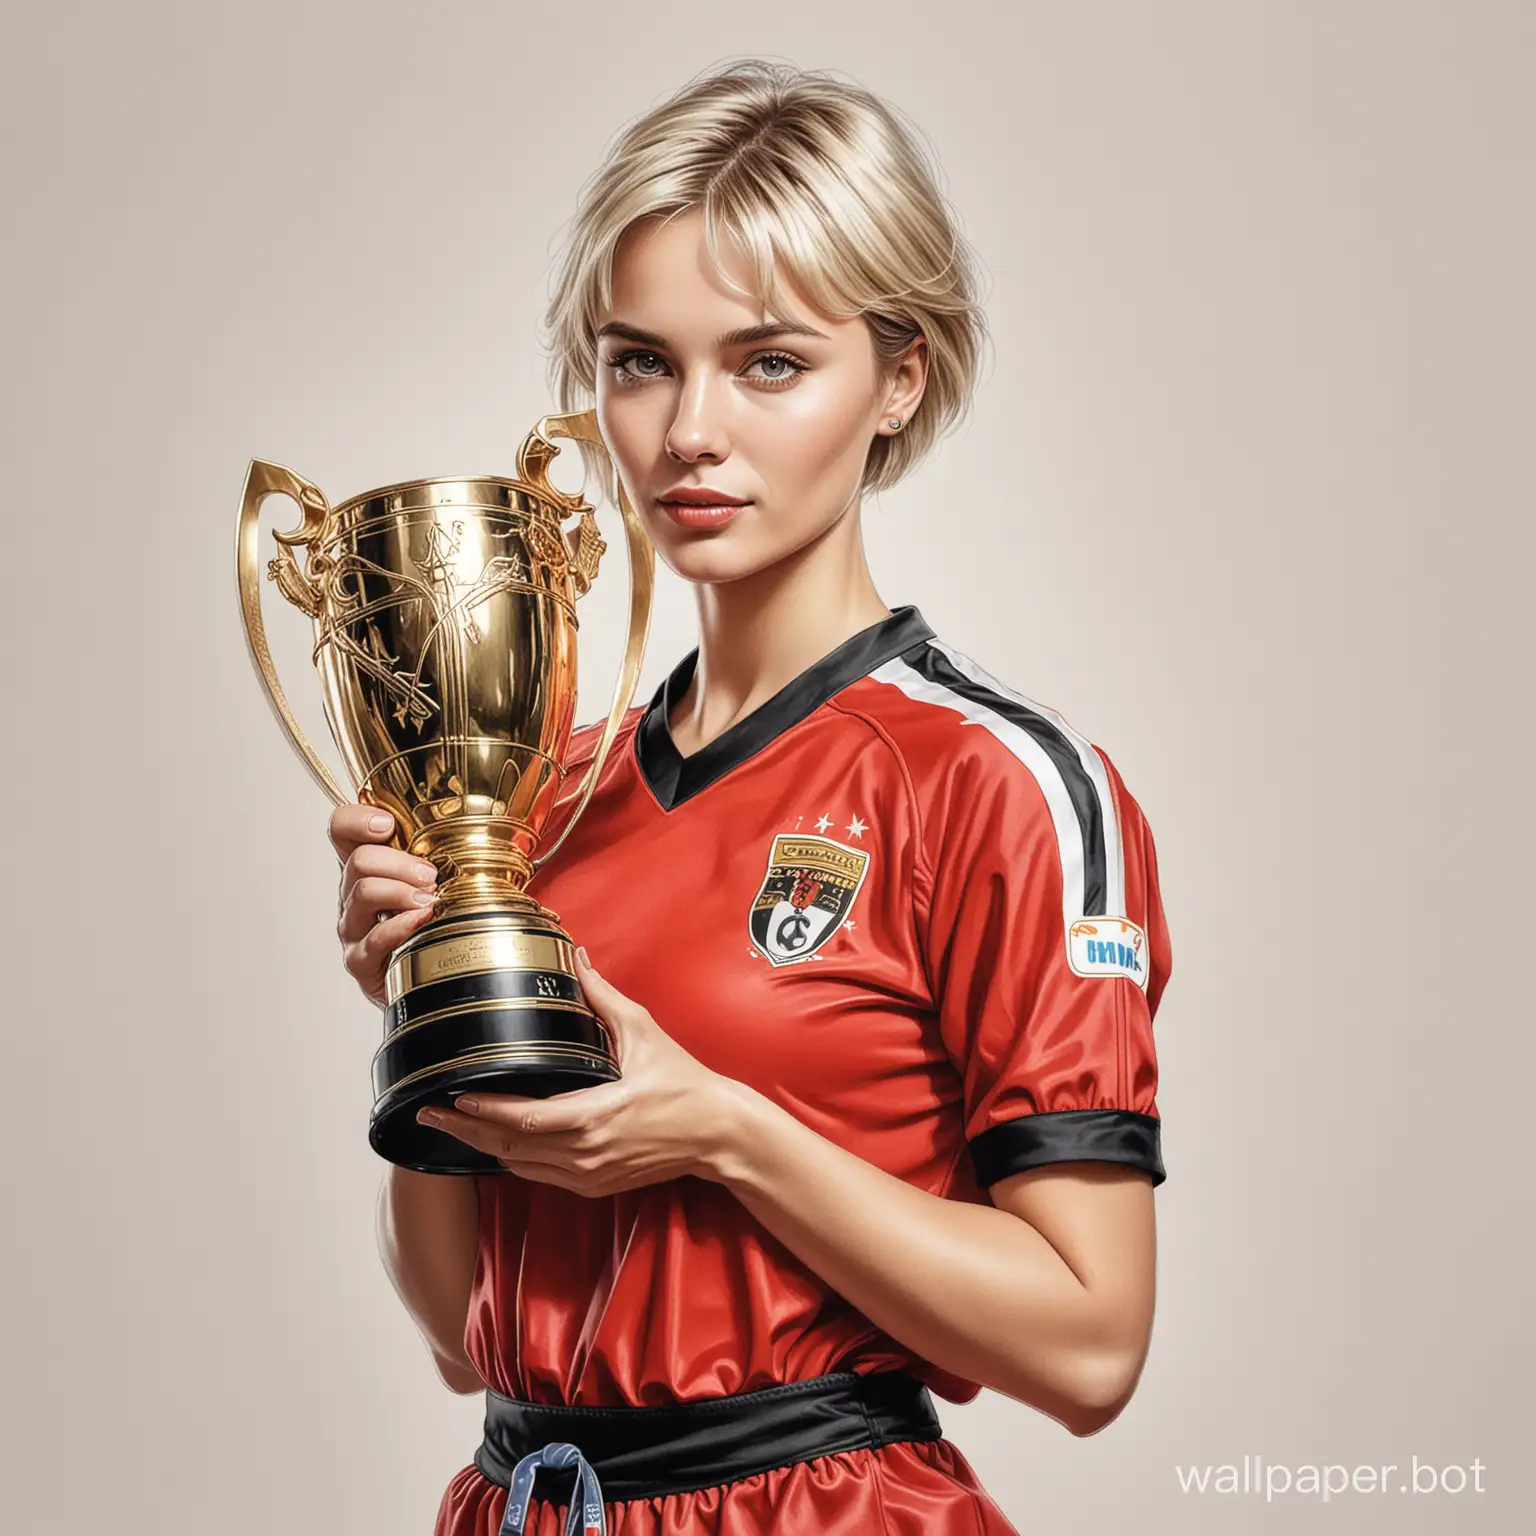 Sketch of young Irina Chashchina with blonde short hair size 4 chest narrow waist in red and black football uniform holding big champions cup on white background highly realistic drawing with color marker